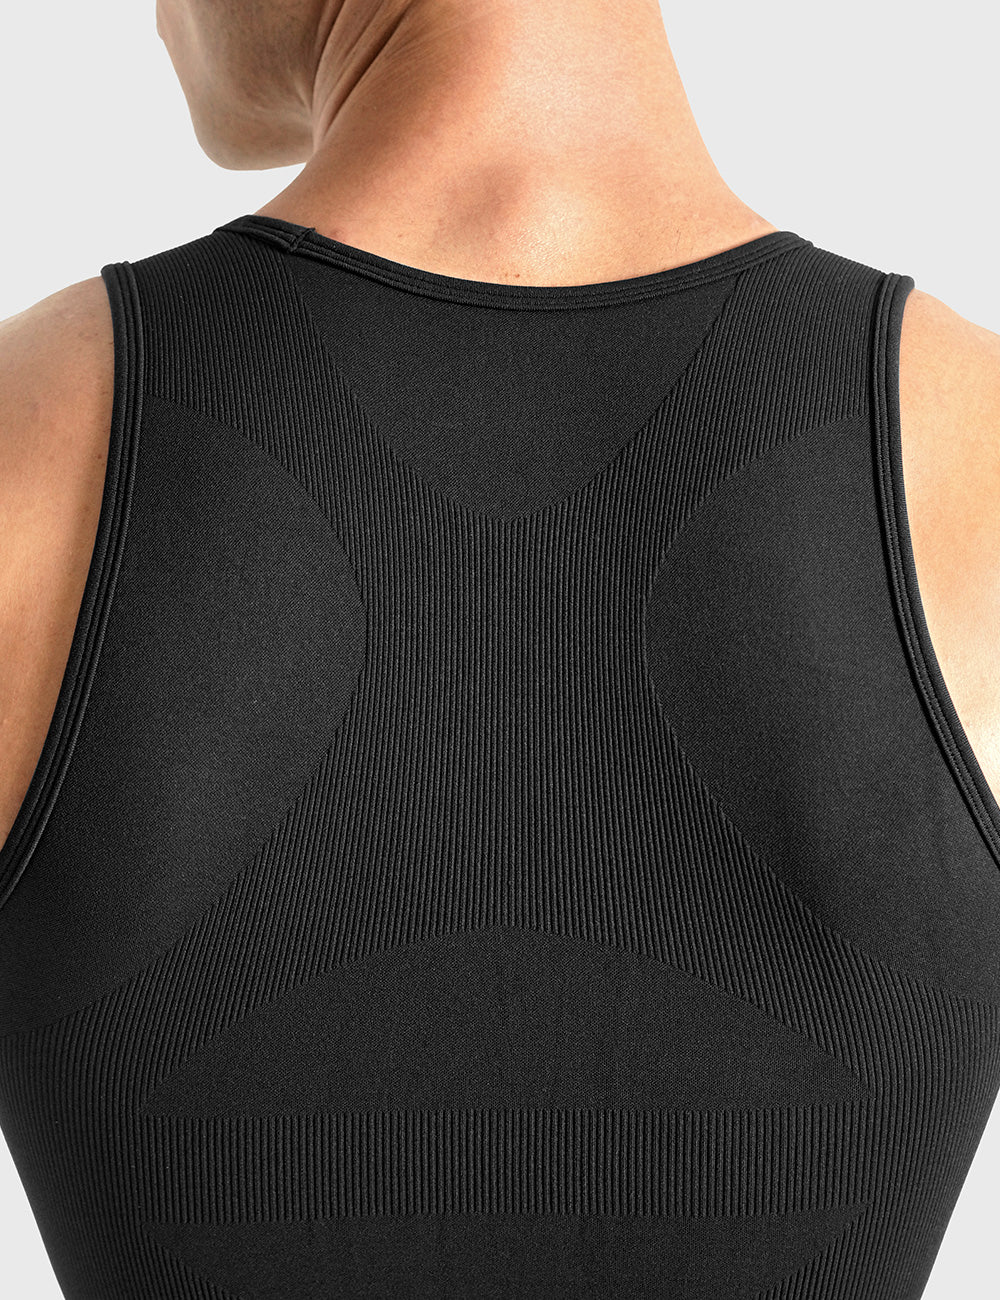 Womens Compression Tank Top